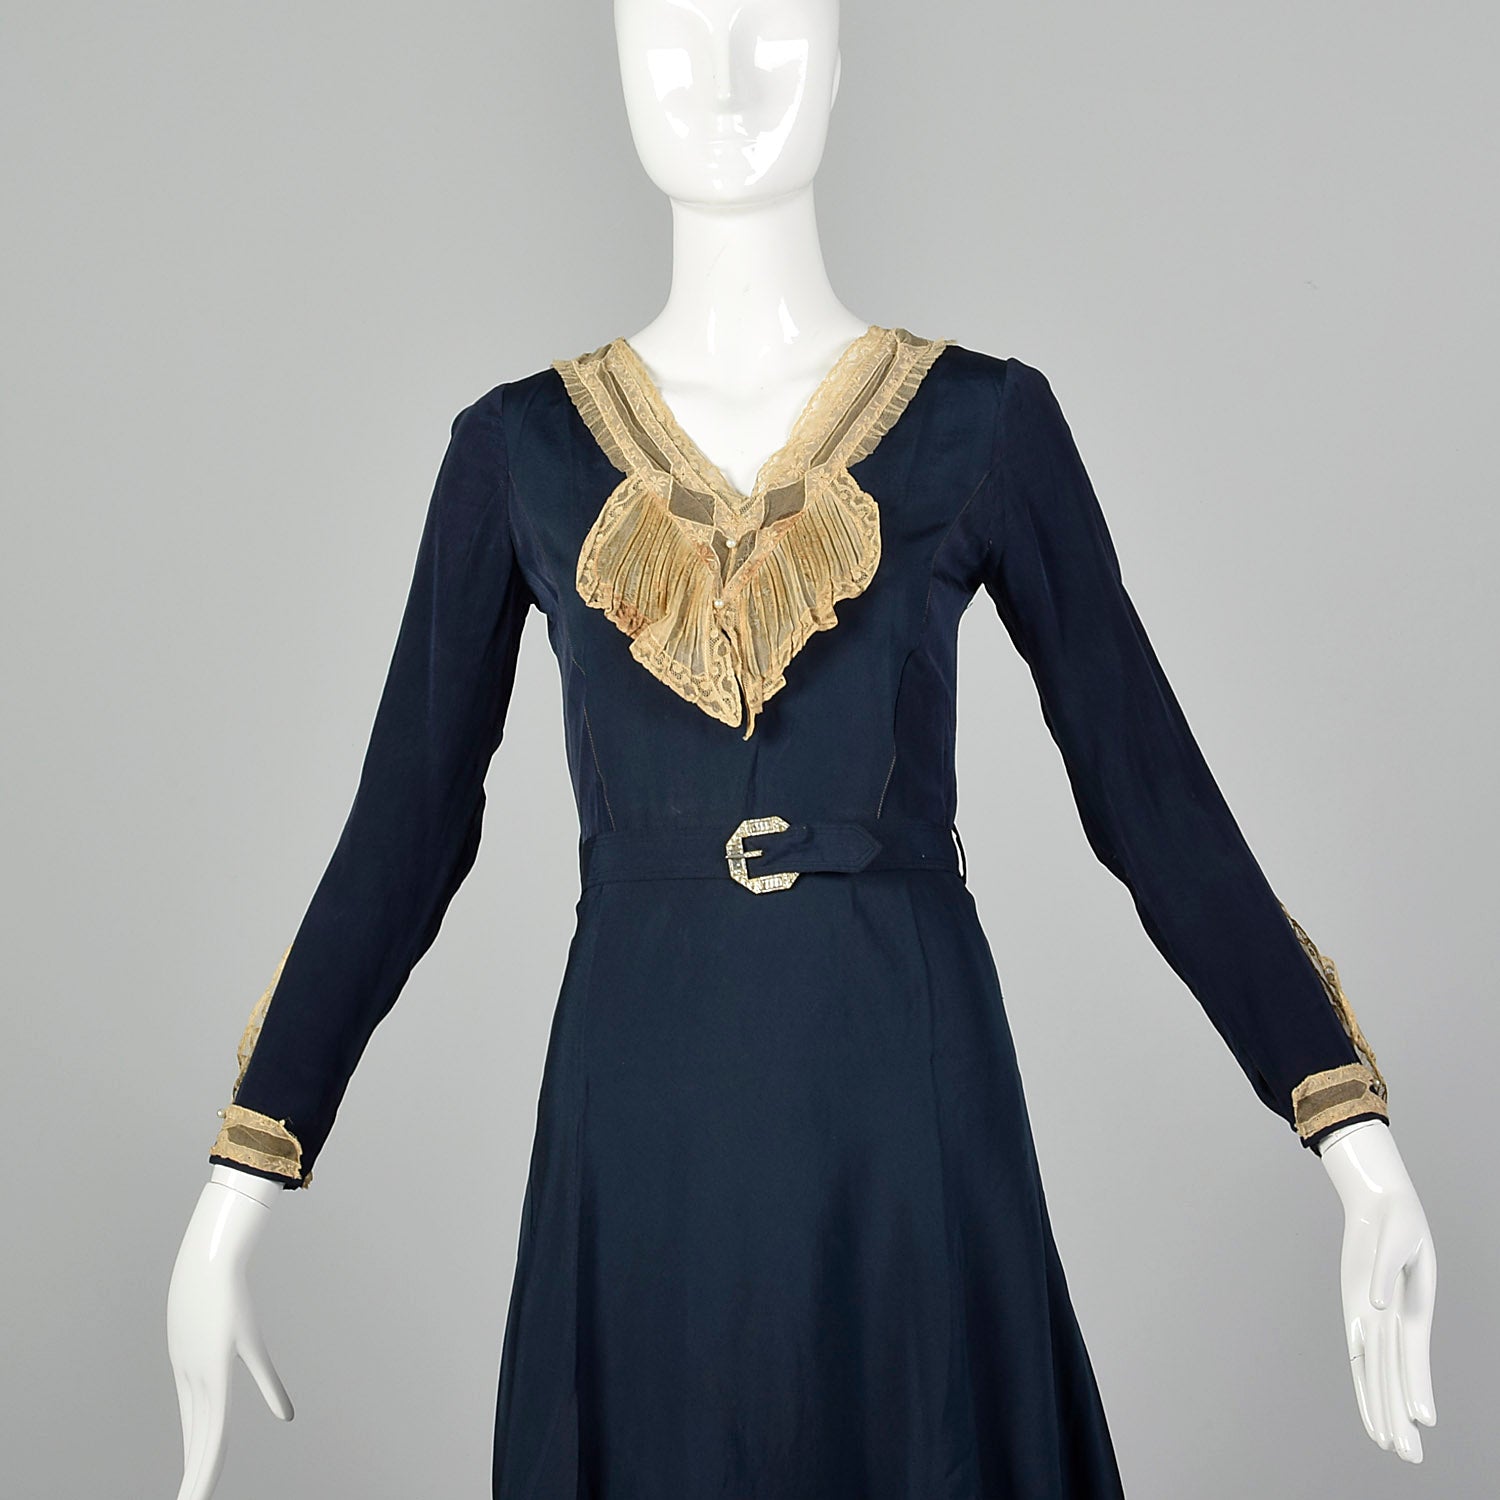 & Blue Frocks Lace – Salvage Dress Frances Style 1930s XS Faire Navy Collar